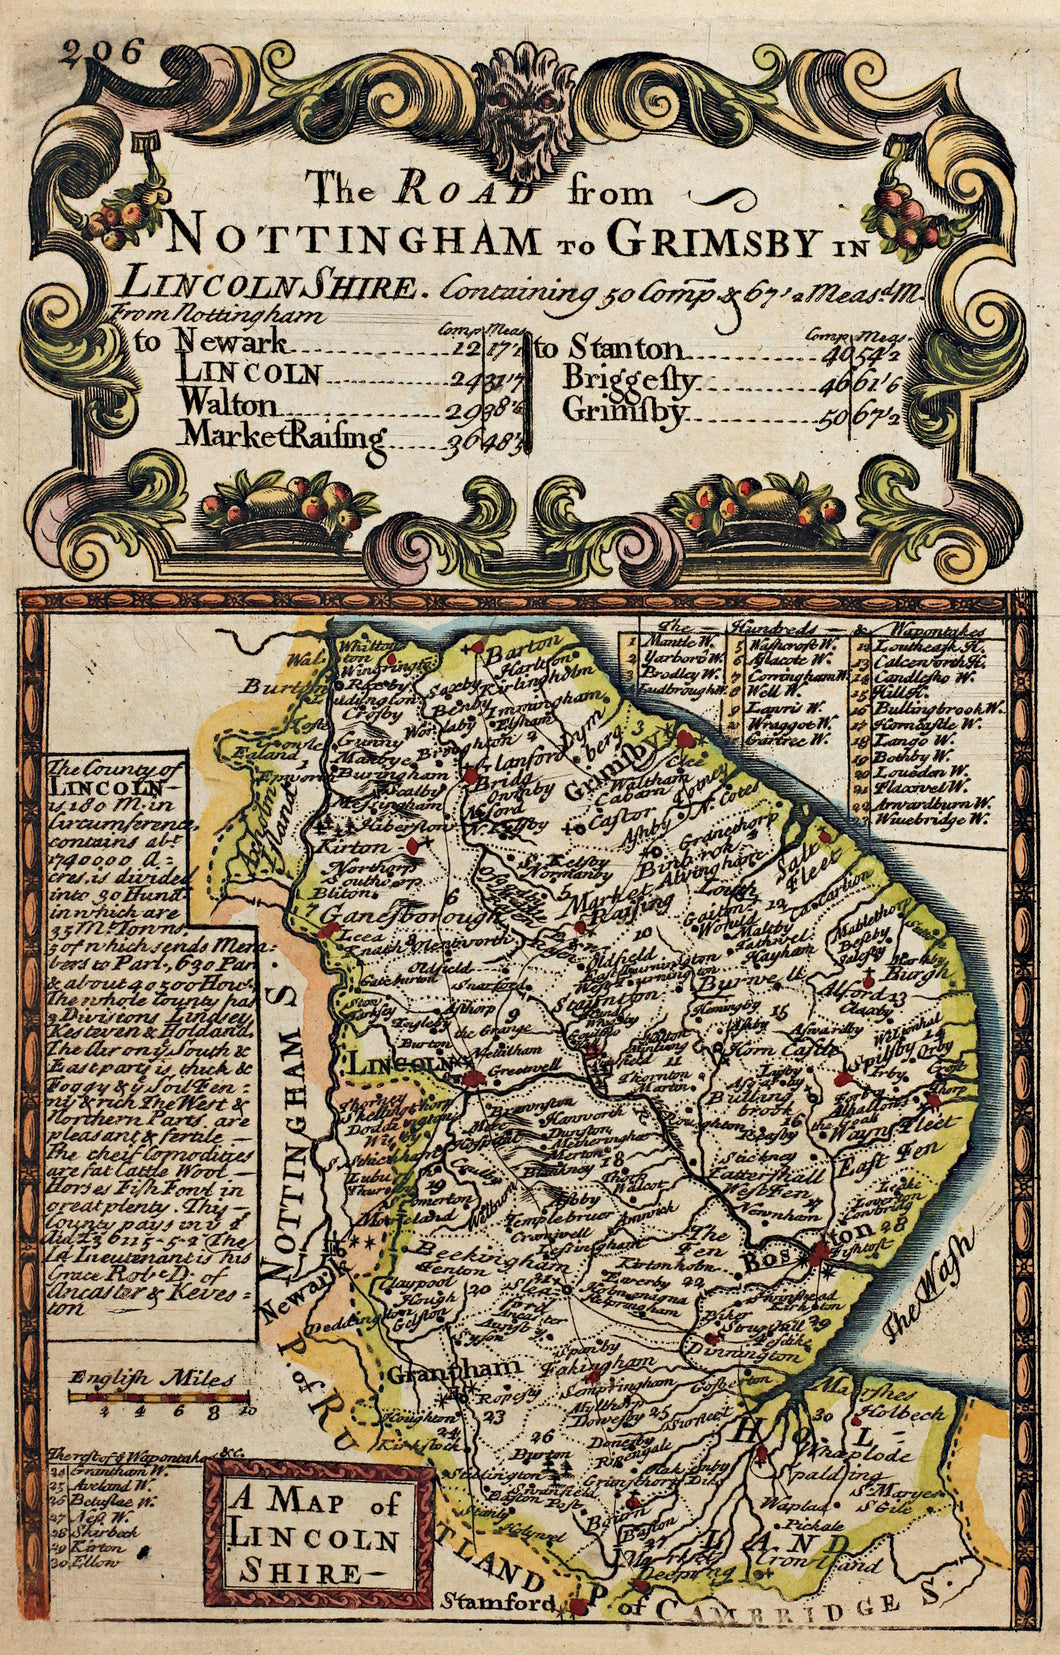 The Road from Nottingham to Grimsby - Antique Map circa 1720